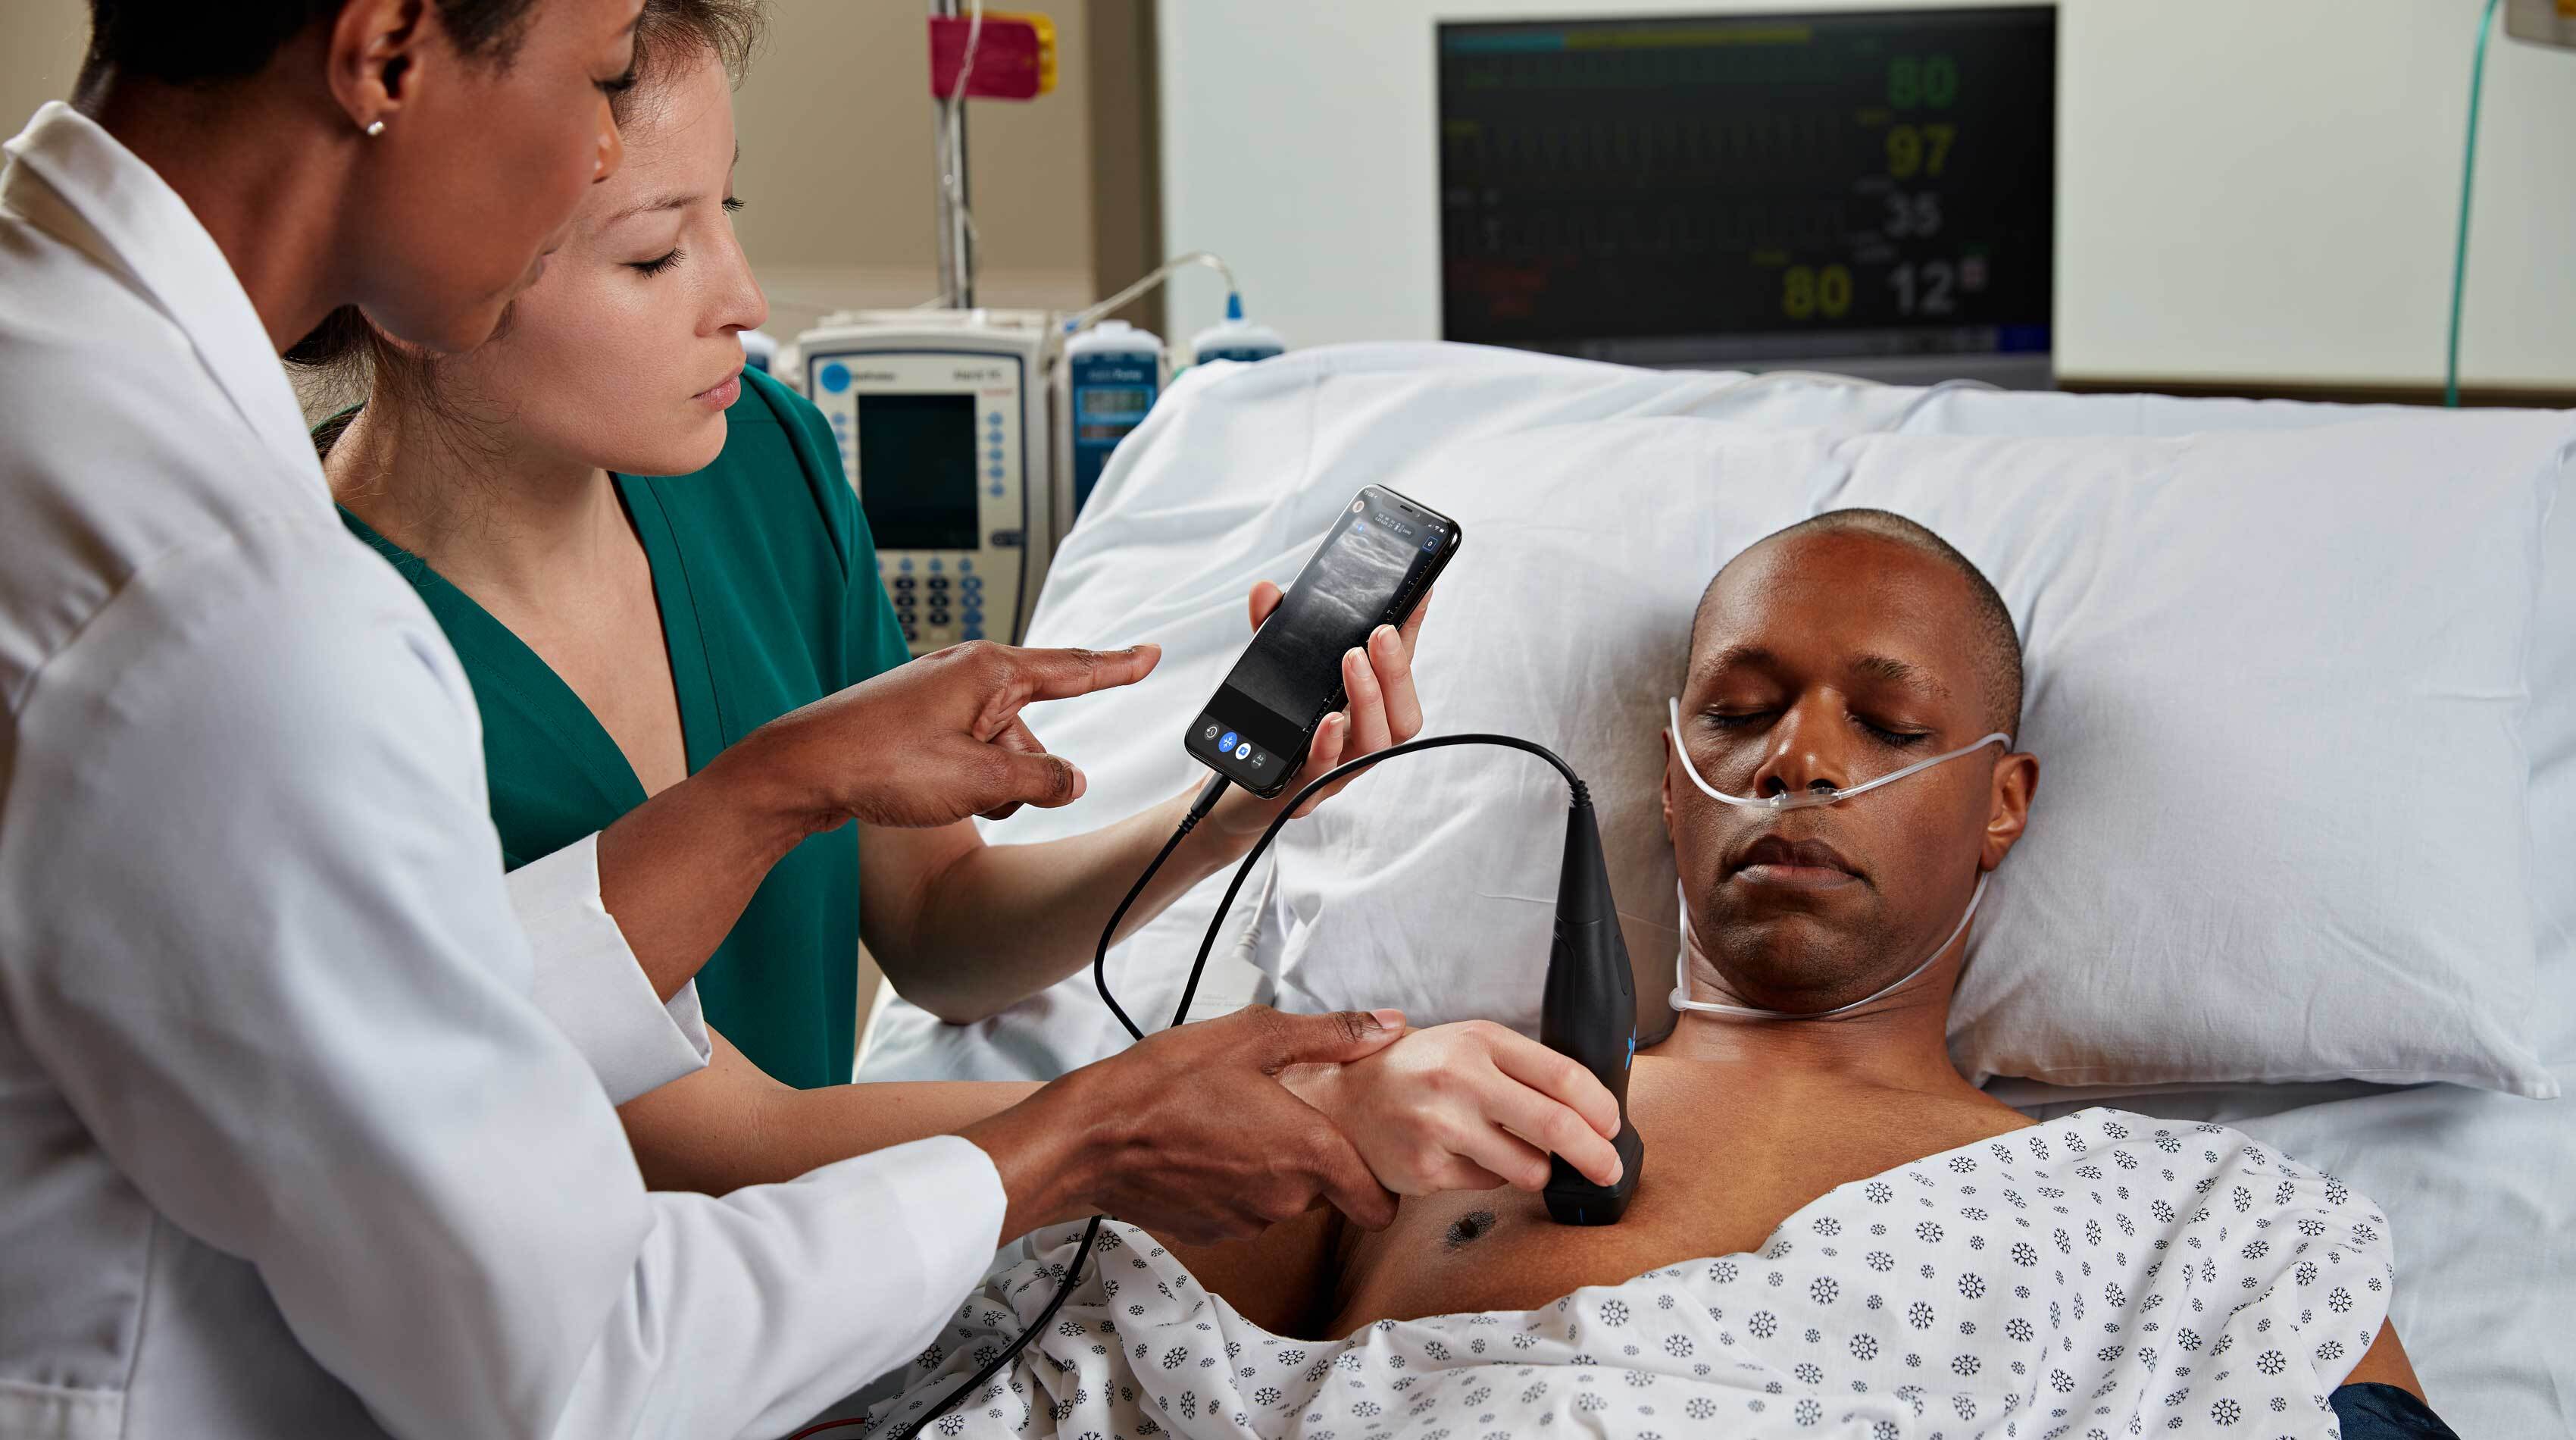 Hospitals are also using the Butterfly iQ wand - Android, iOS devices can help patients remotely test for coronavirus